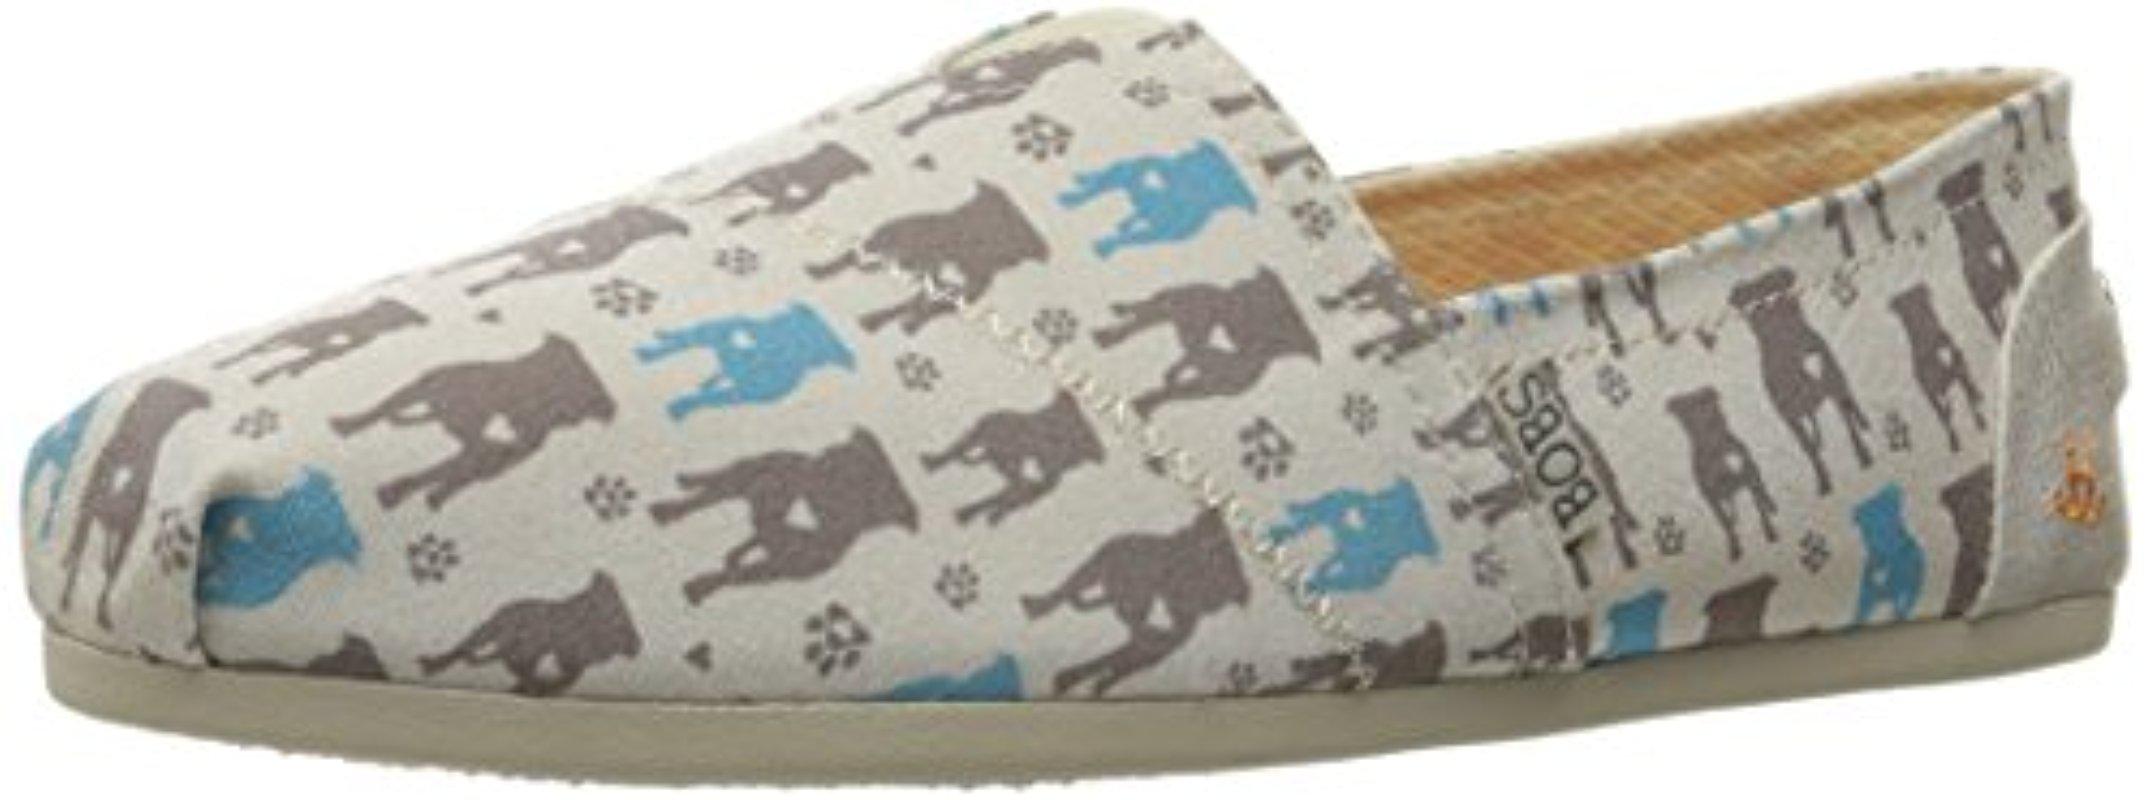 Skechers Bobs From Bobs Plush-gentle 